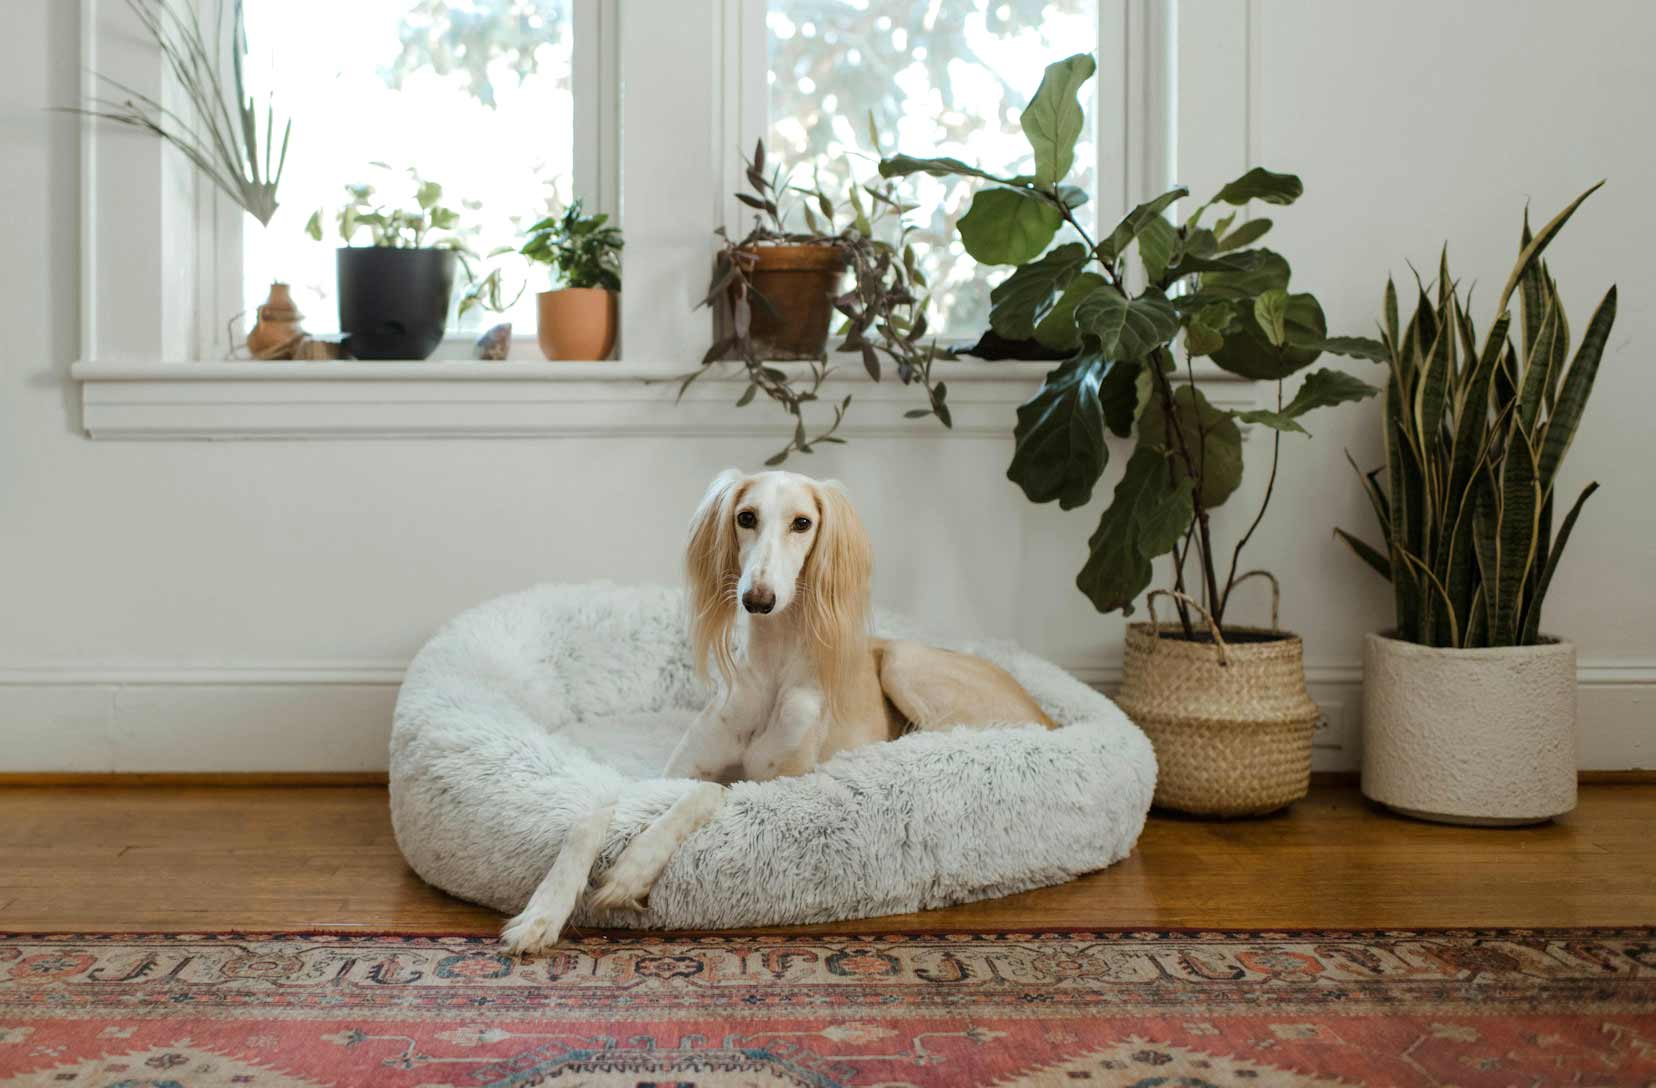 Saluki on its soft bed in a room